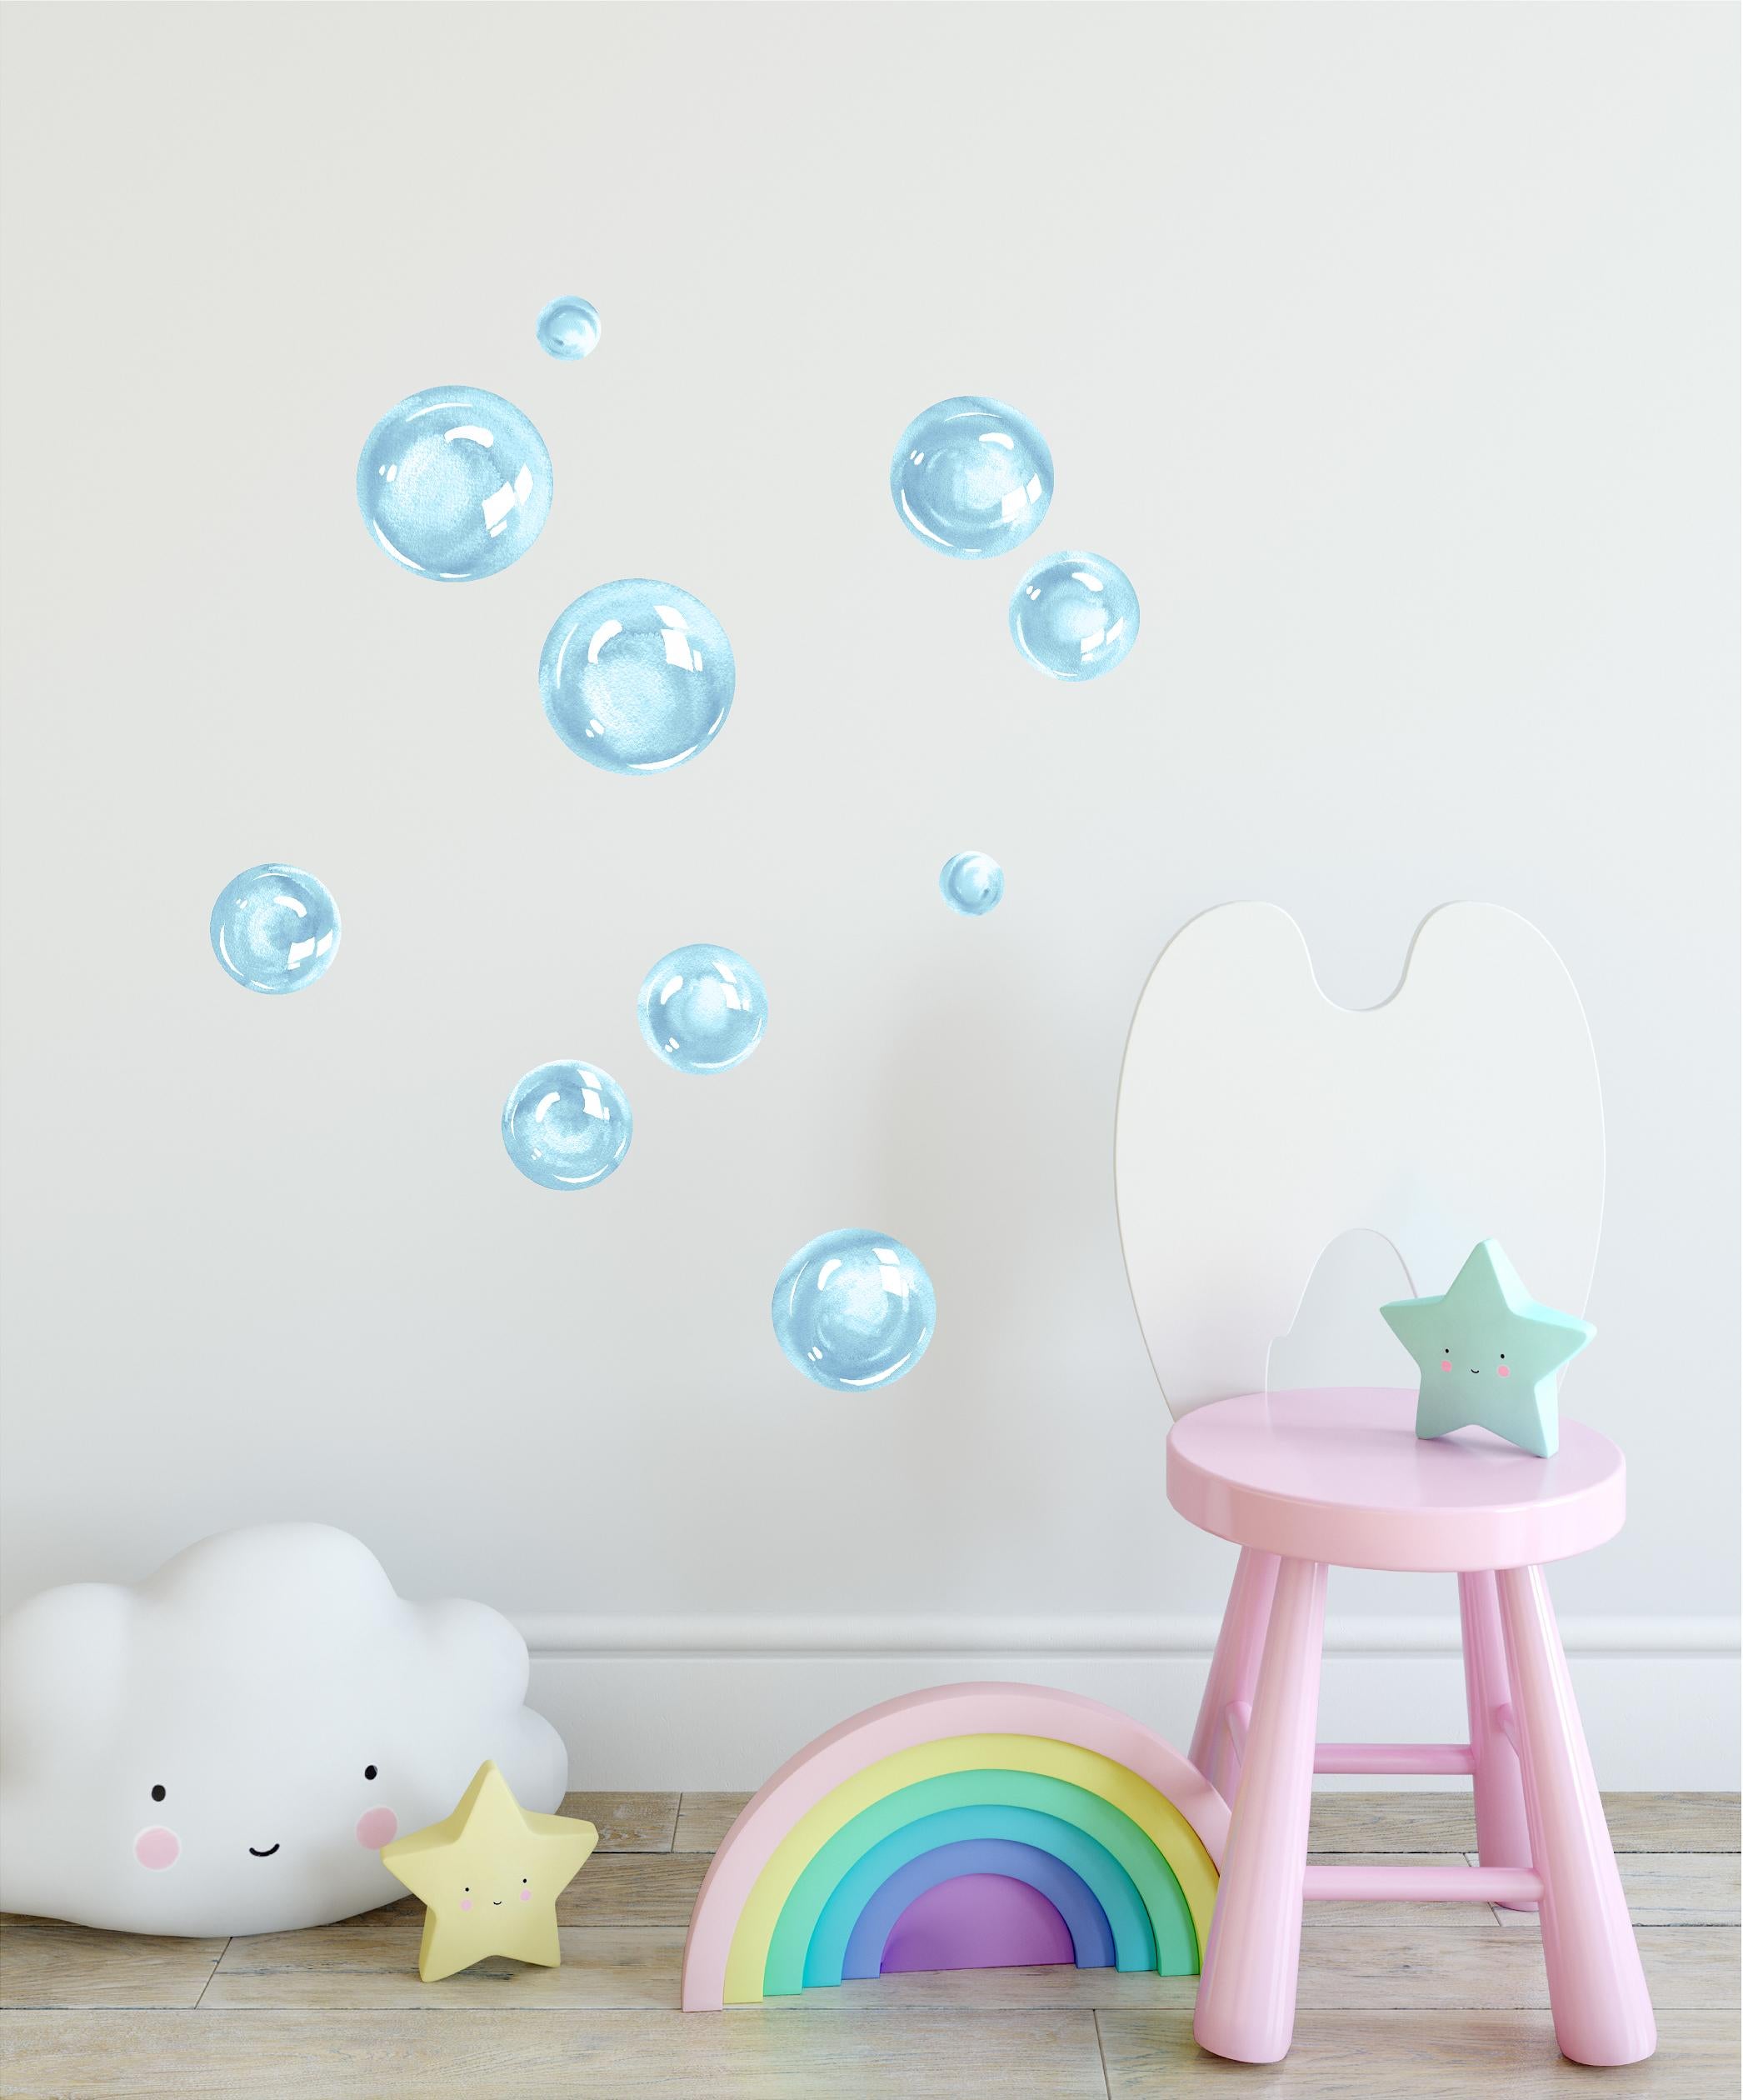 Watercolor Blue Bubbles Wall Decal Set Bubbles Wall Stickers Wall Art Nursery Decor Removable Fabric Vinyl Wall Stickers SIZE SMALL | DecalBaby